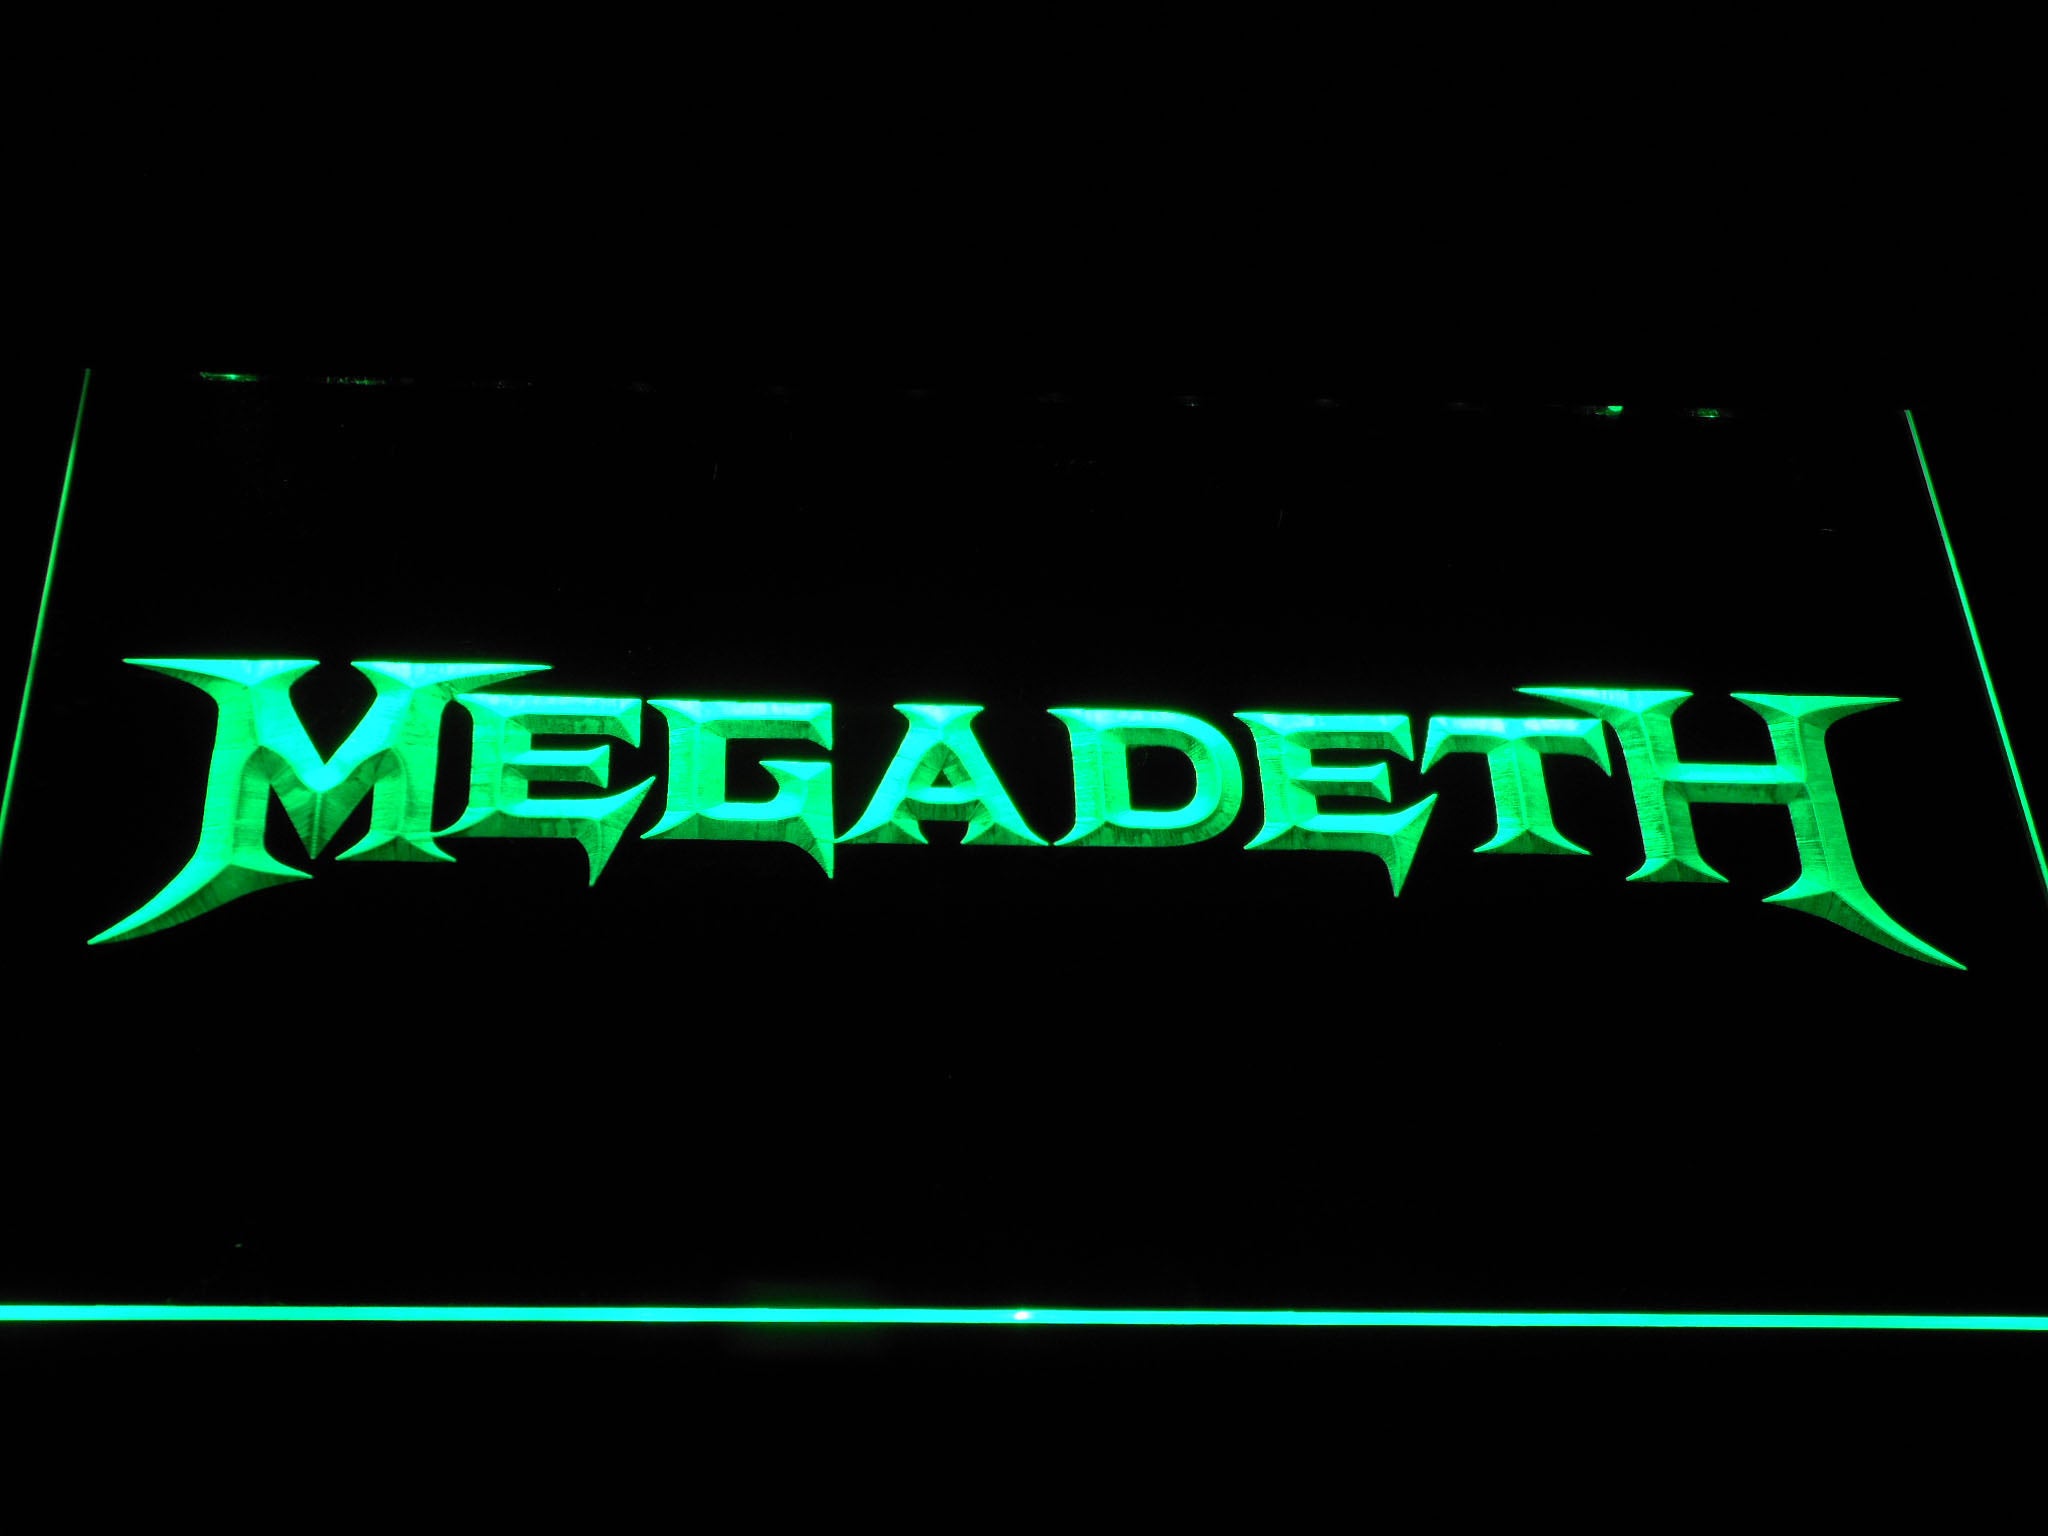 Megadeth American Heavy Metal Band LED Neon Sign